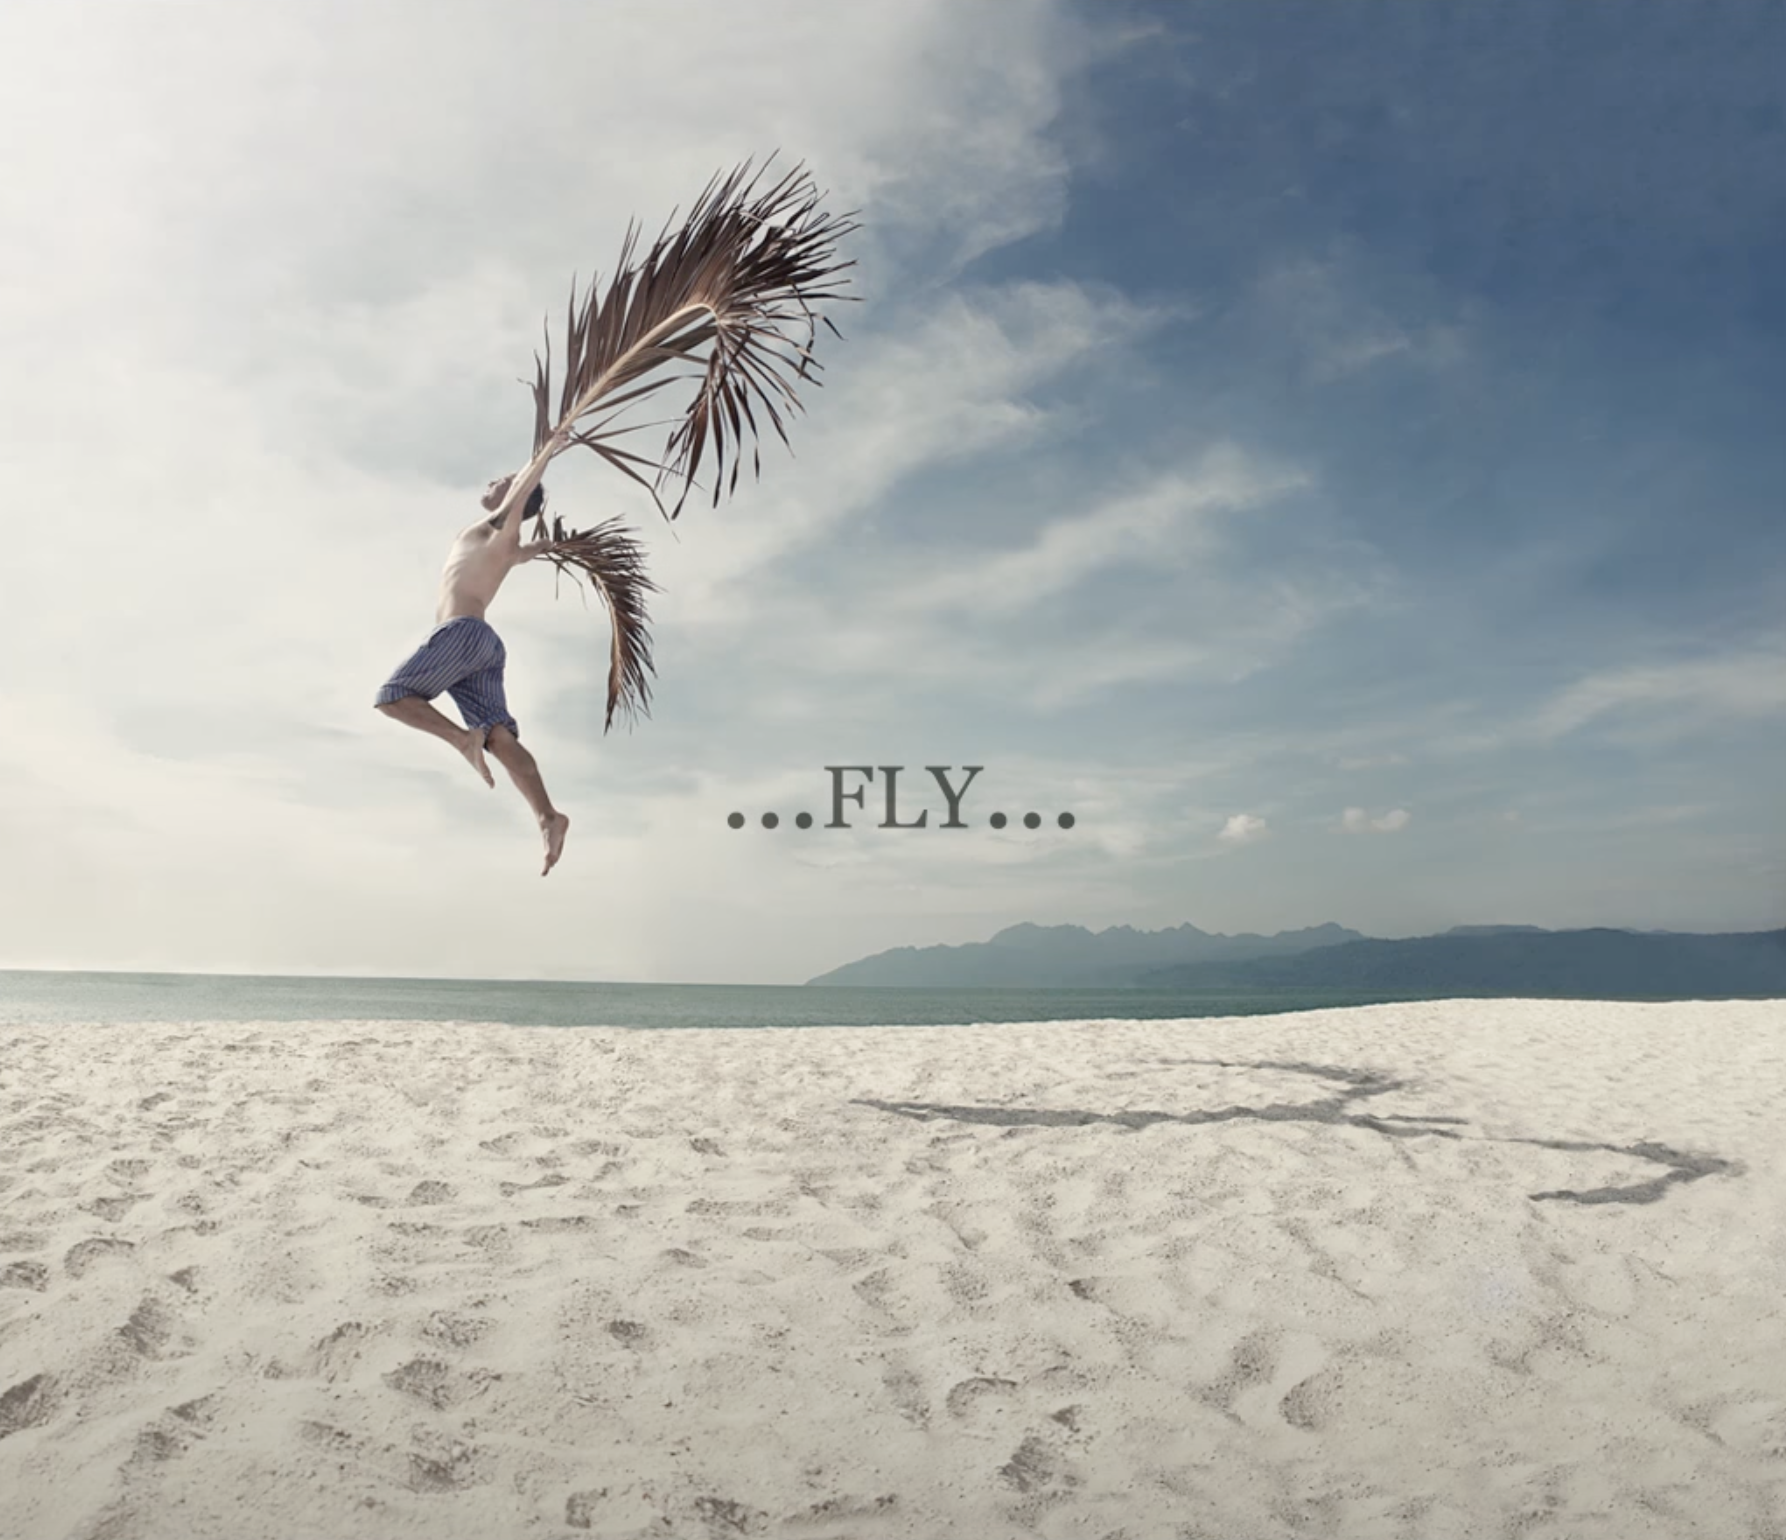 Making man fly – how to create levitation in Photoshop